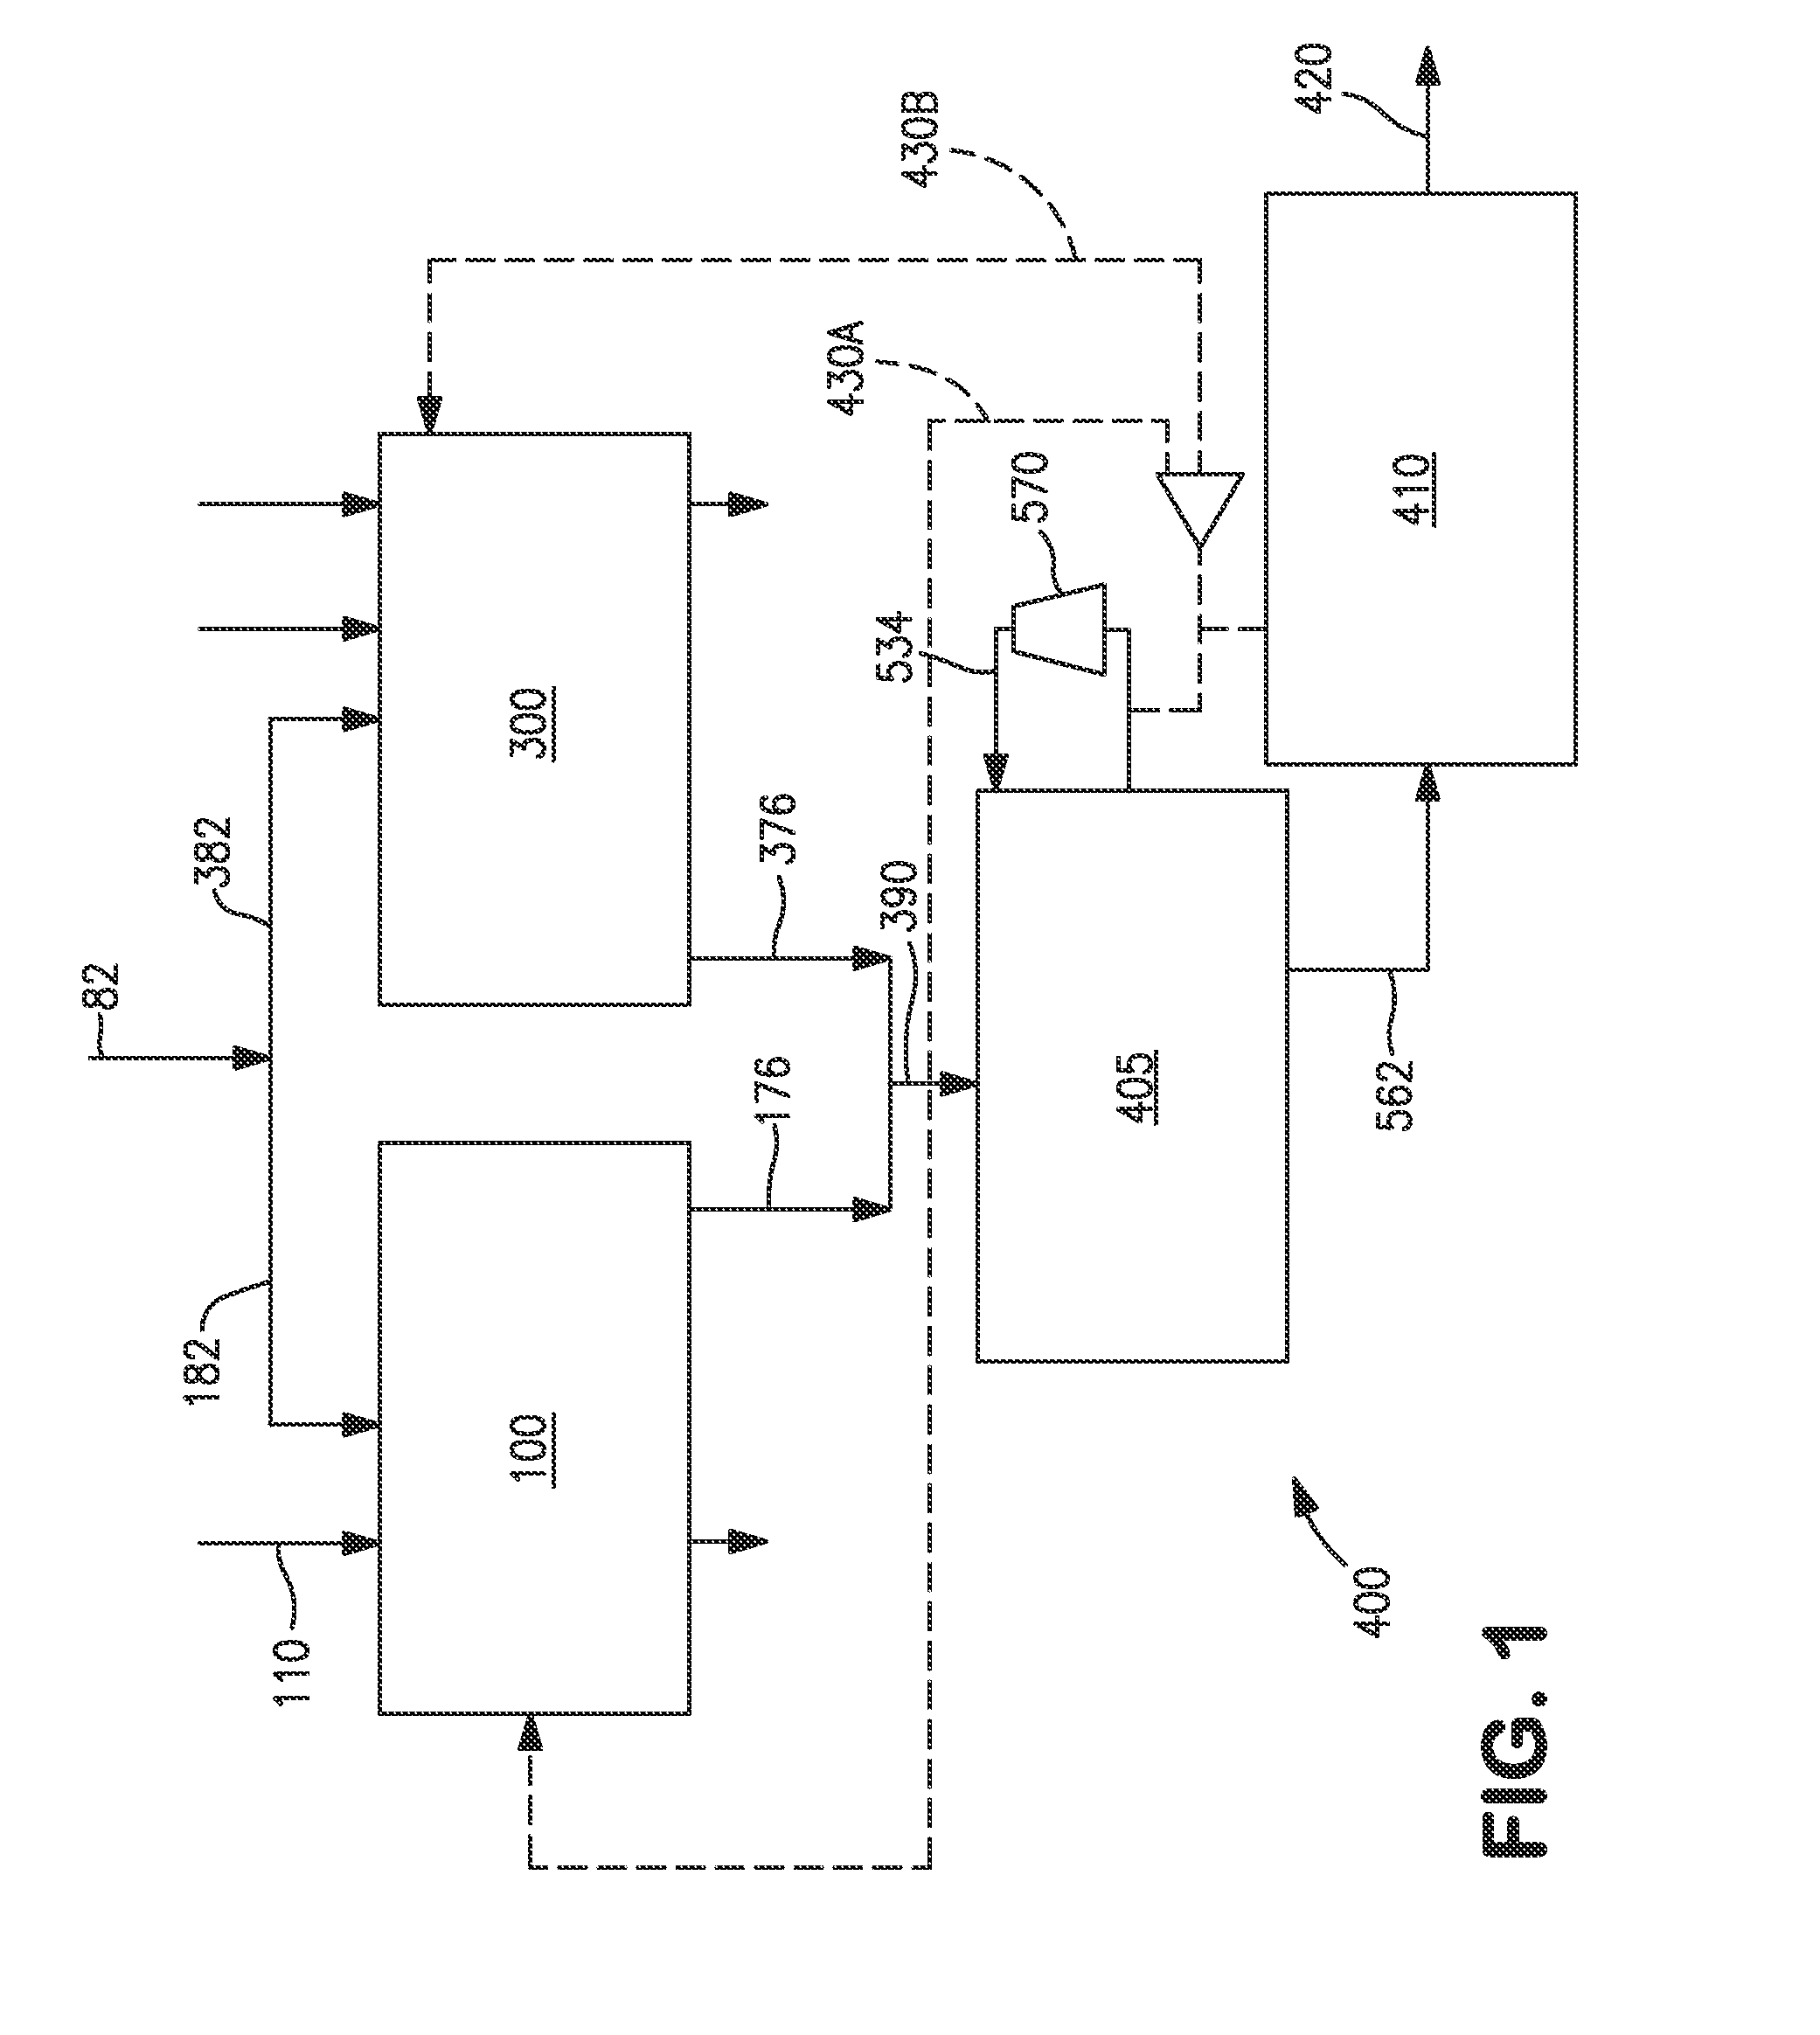 Method and system for producing methanol using an oxygen transport membrane based reforming system